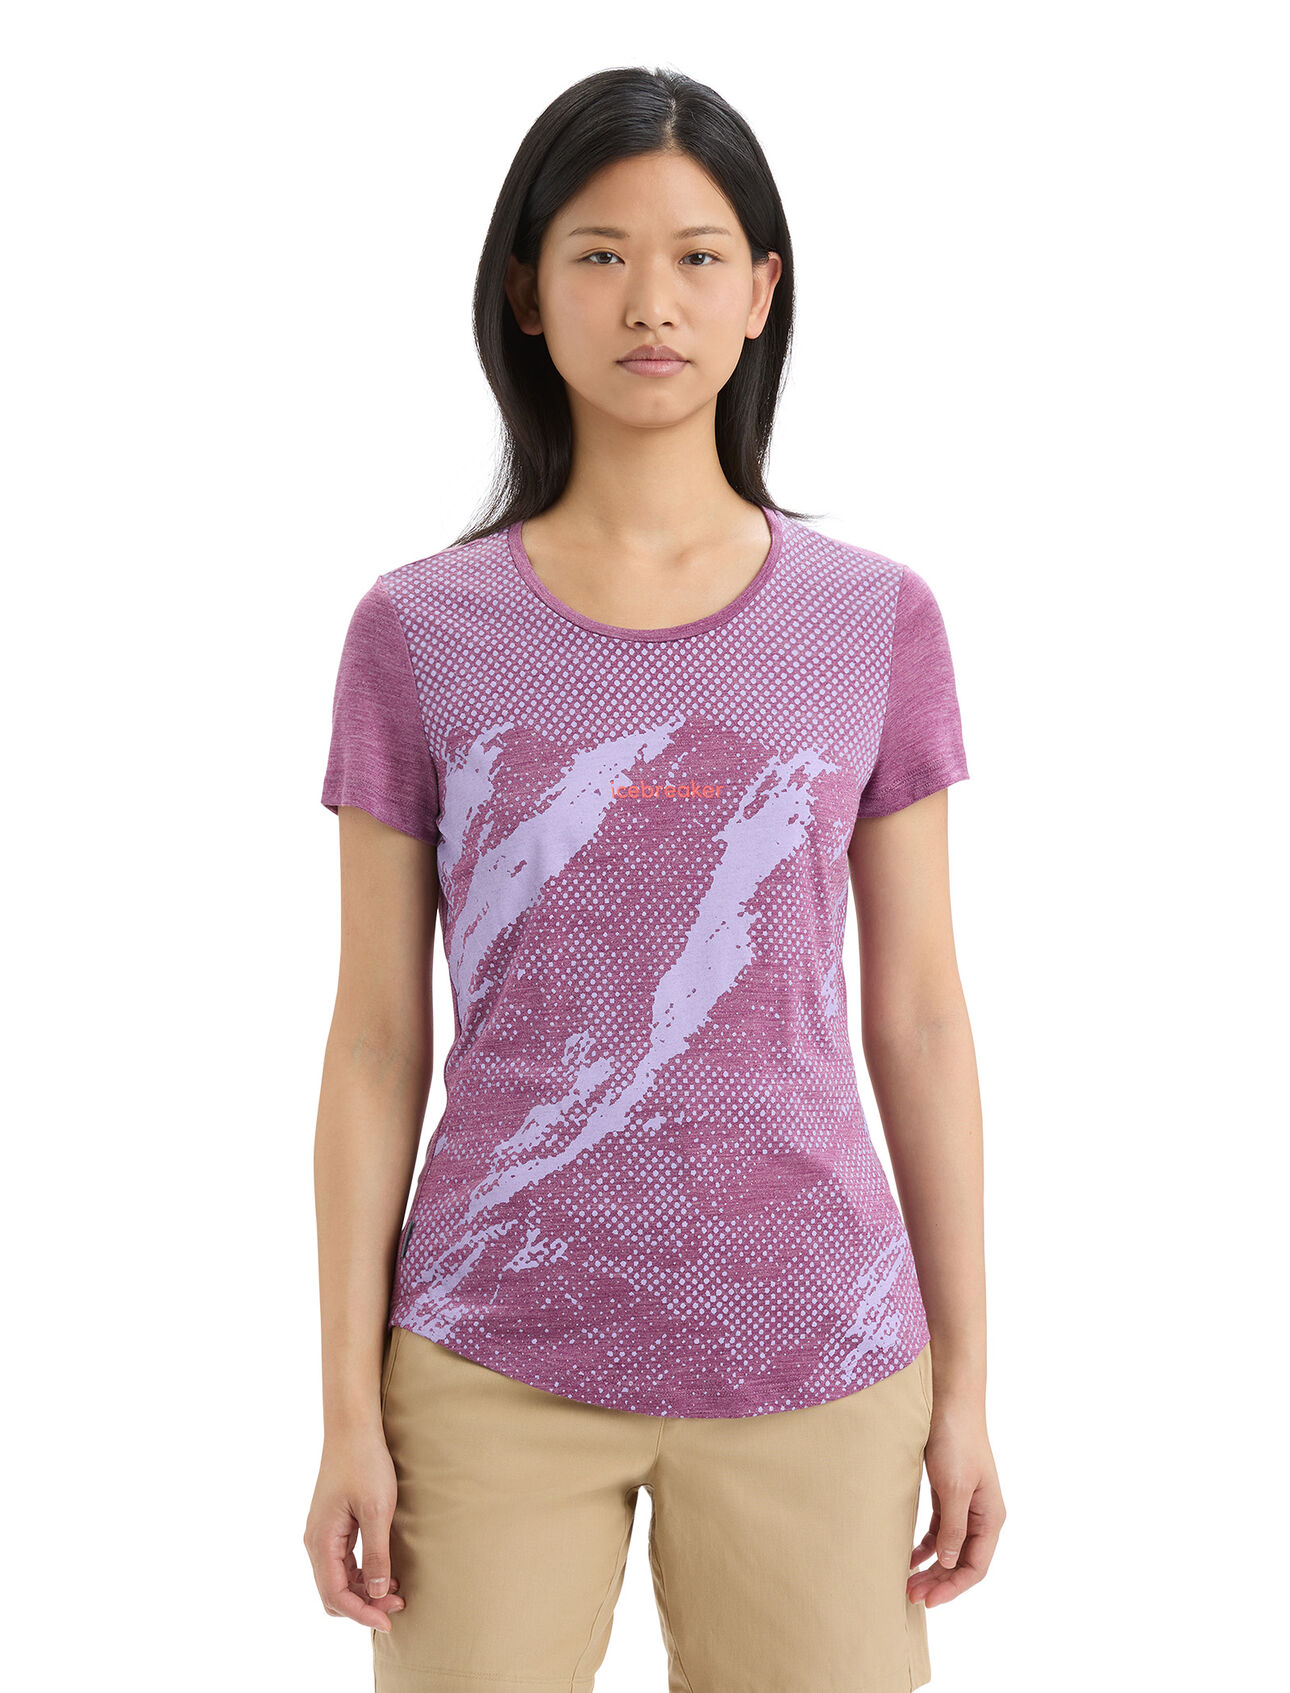 Womens Merino Sphere II Short Sleeve T-Shirt Trail A soft merino-blend tee made with our lightweight Cool-Lite™ jersey fabric, the Sphere II Short Sleeve Tee Trail provides breathability, odour resistance and comfort. The retro, half-tone print graphic adds a dose of mountain inspiration.